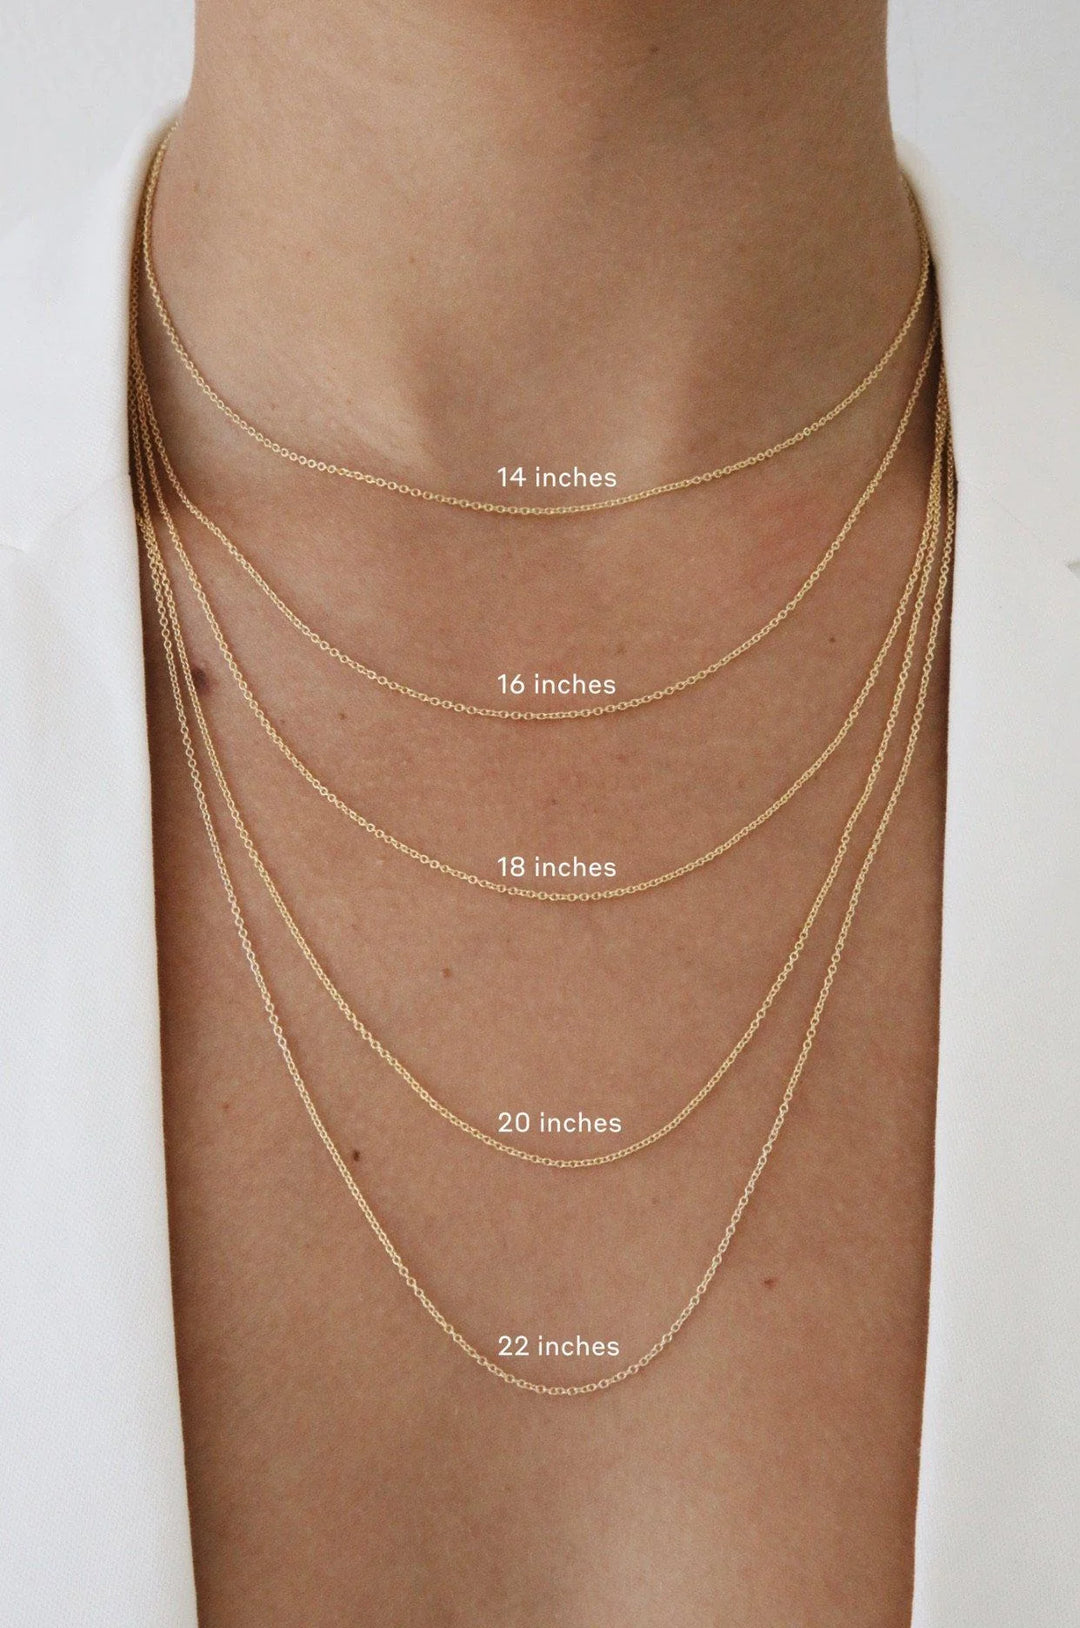 Tae Chain Necklace - Gold